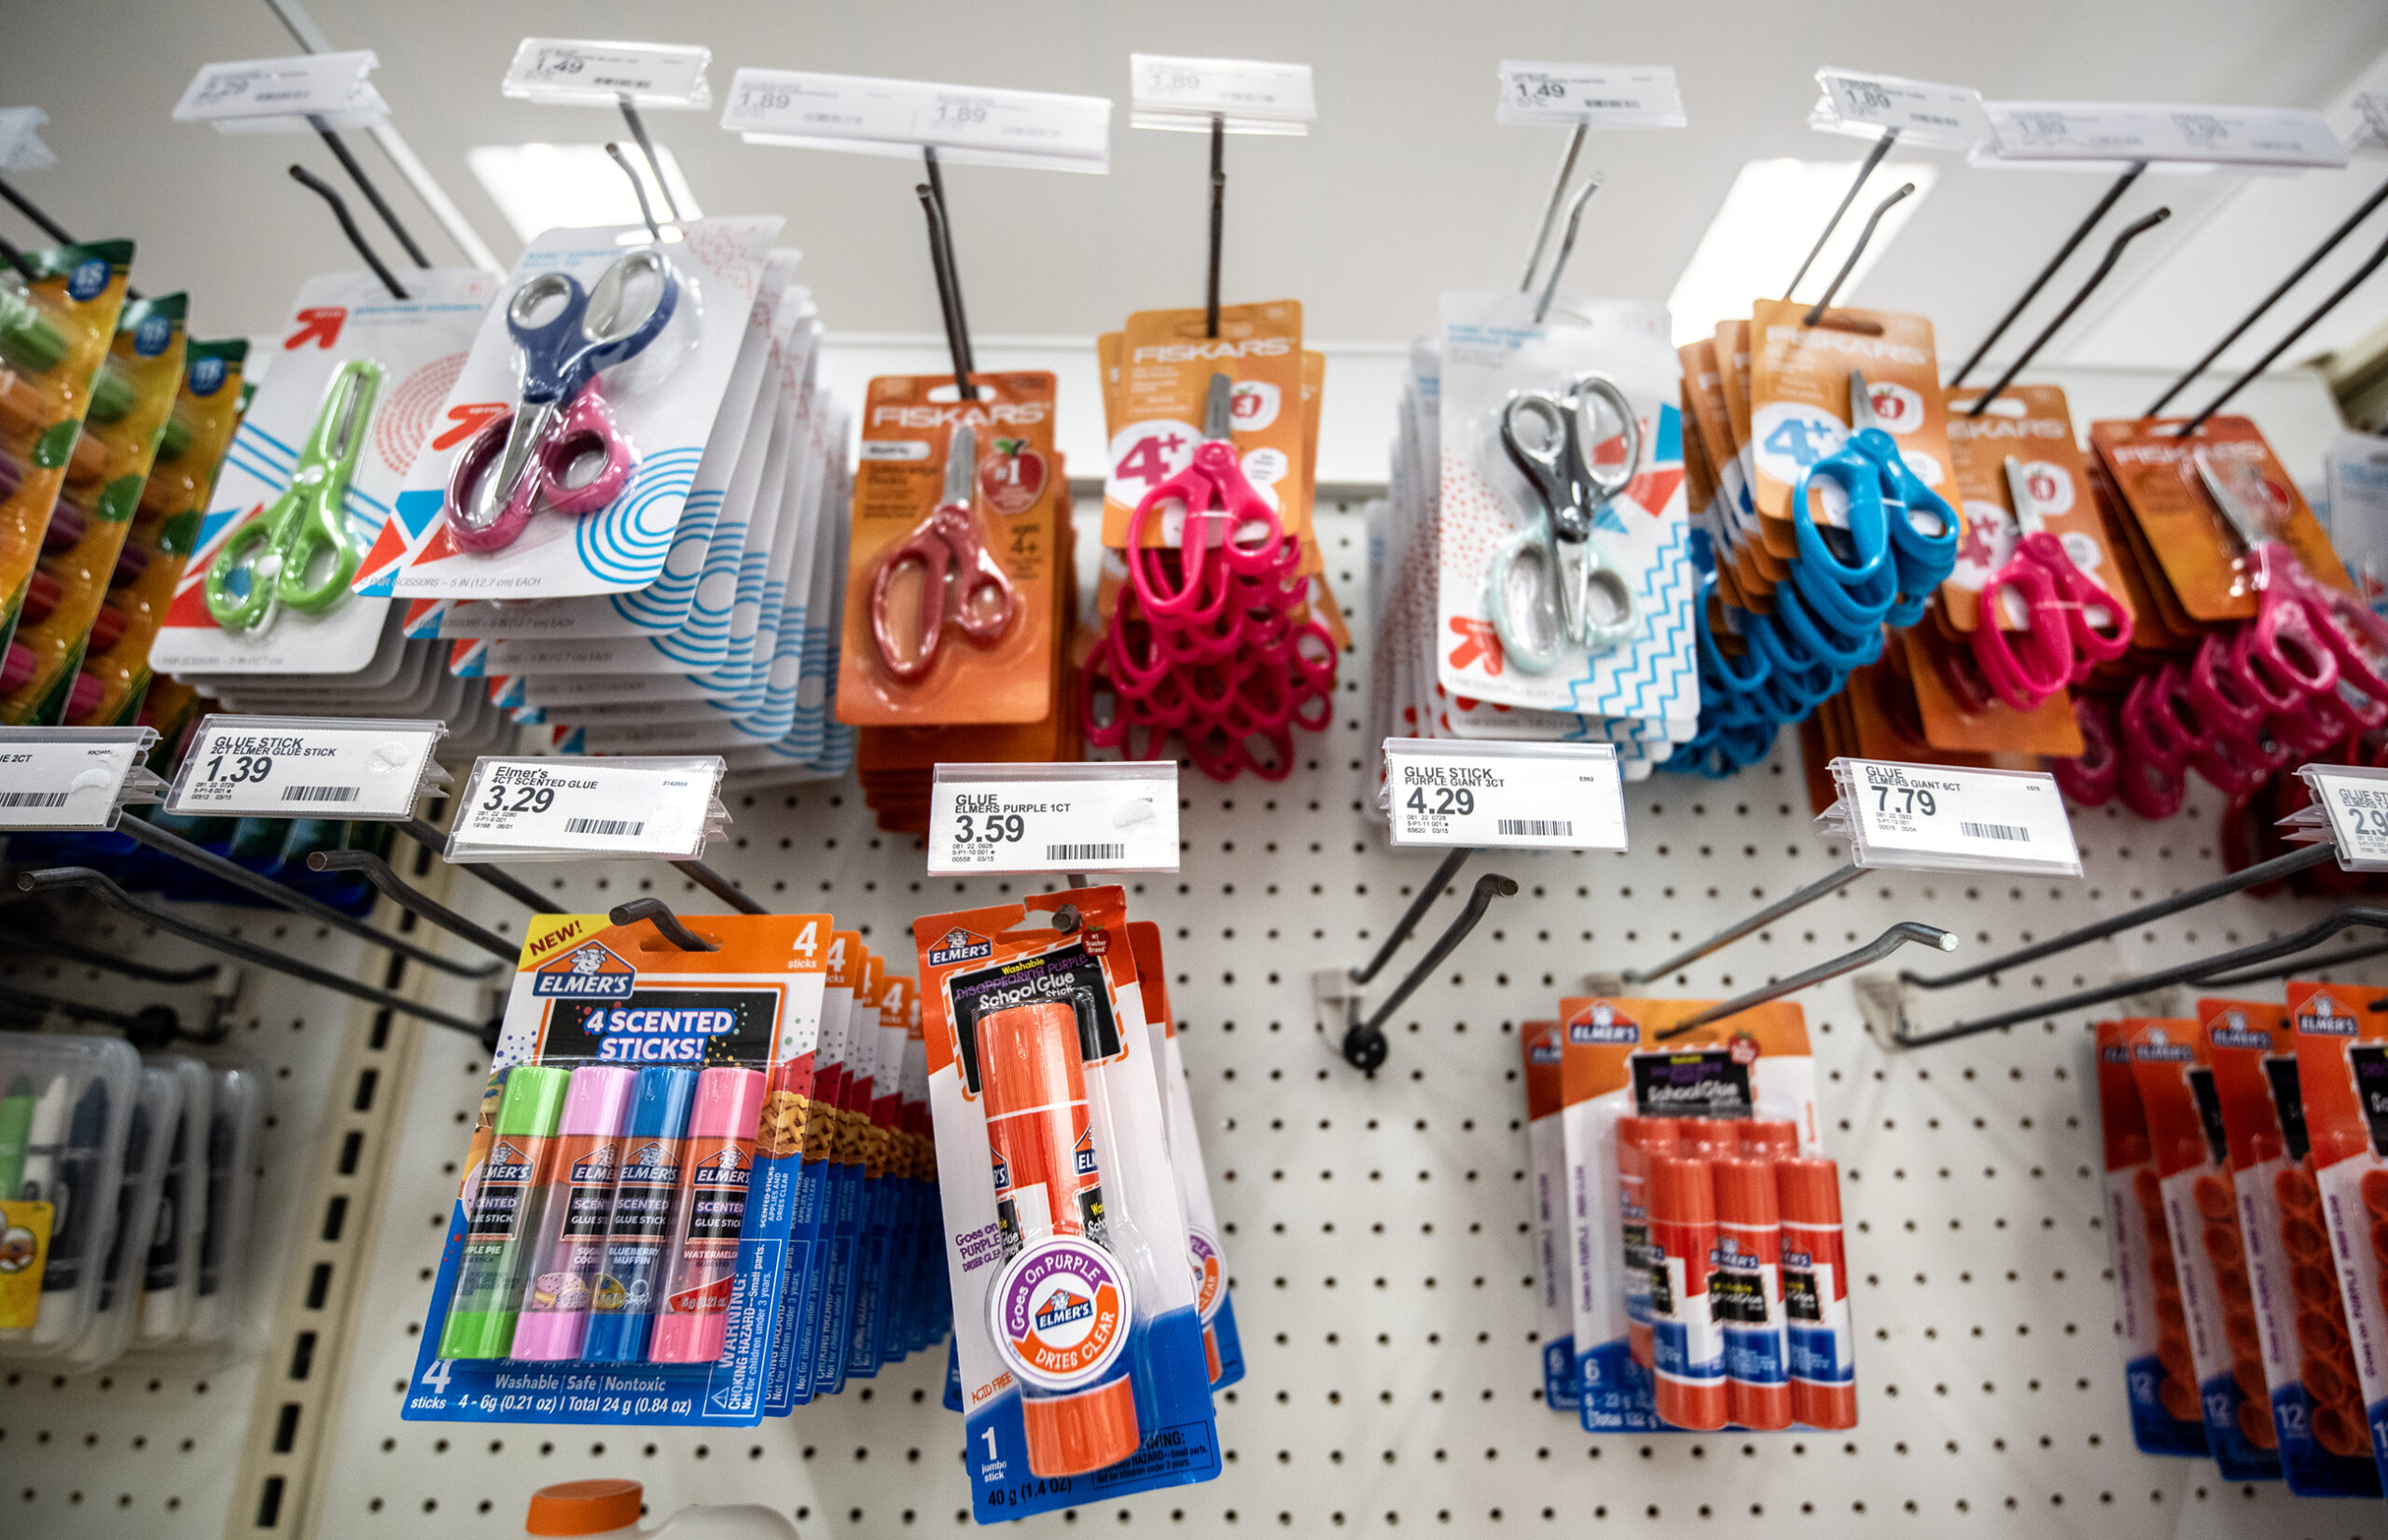 Glue sticks and scissors are displayed with prices on a shelf.